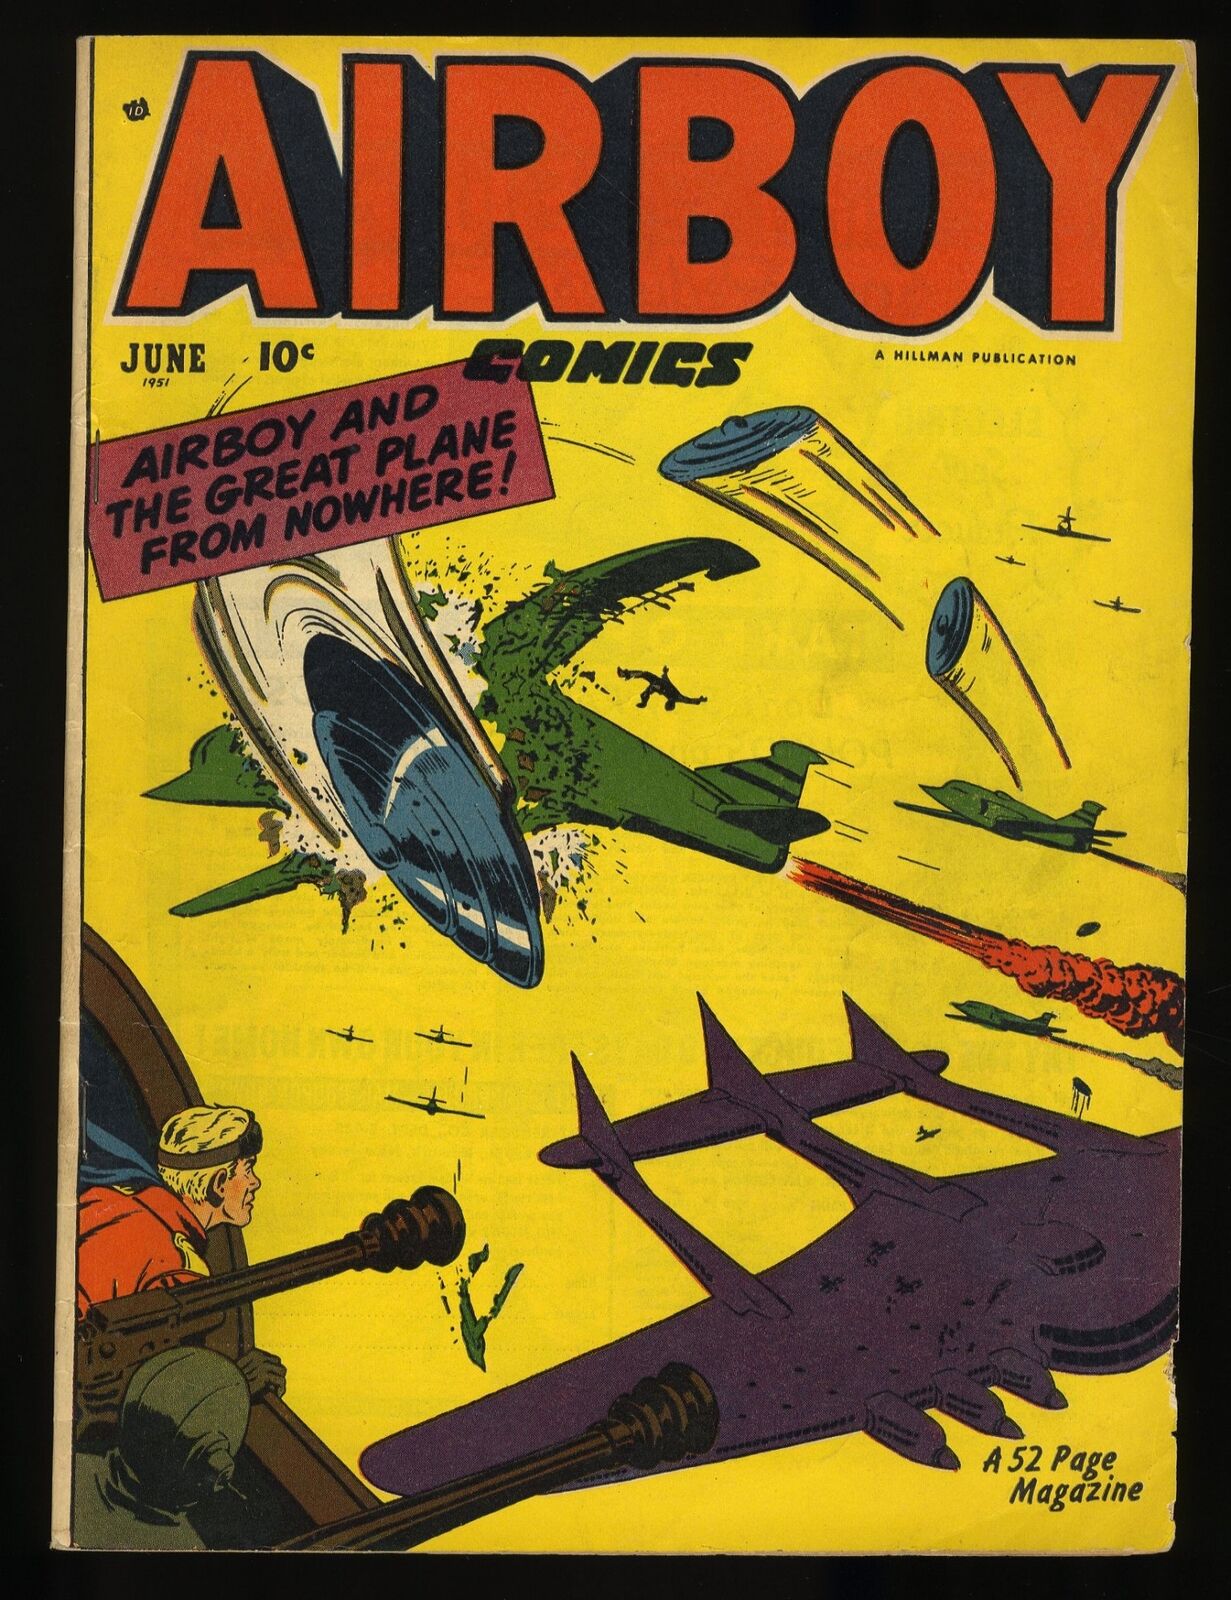 Airboy Comics (1945) v8 #5 FN- 5.5 The Great Plane from Nowhere Hillman 1951